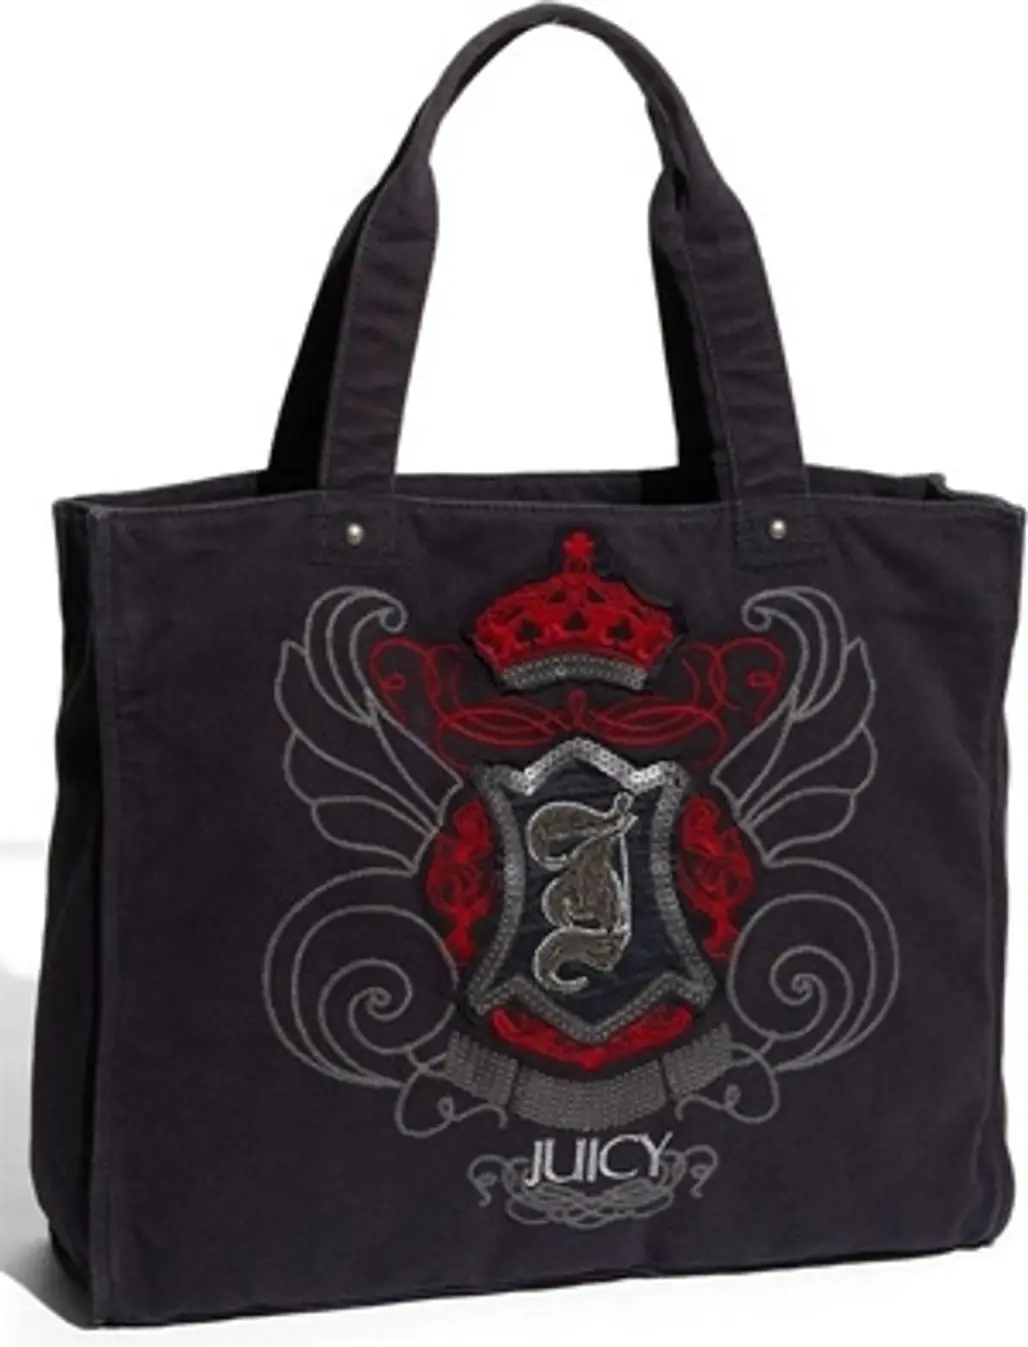 Juicy Couture “Military – Power” Canvas Tote